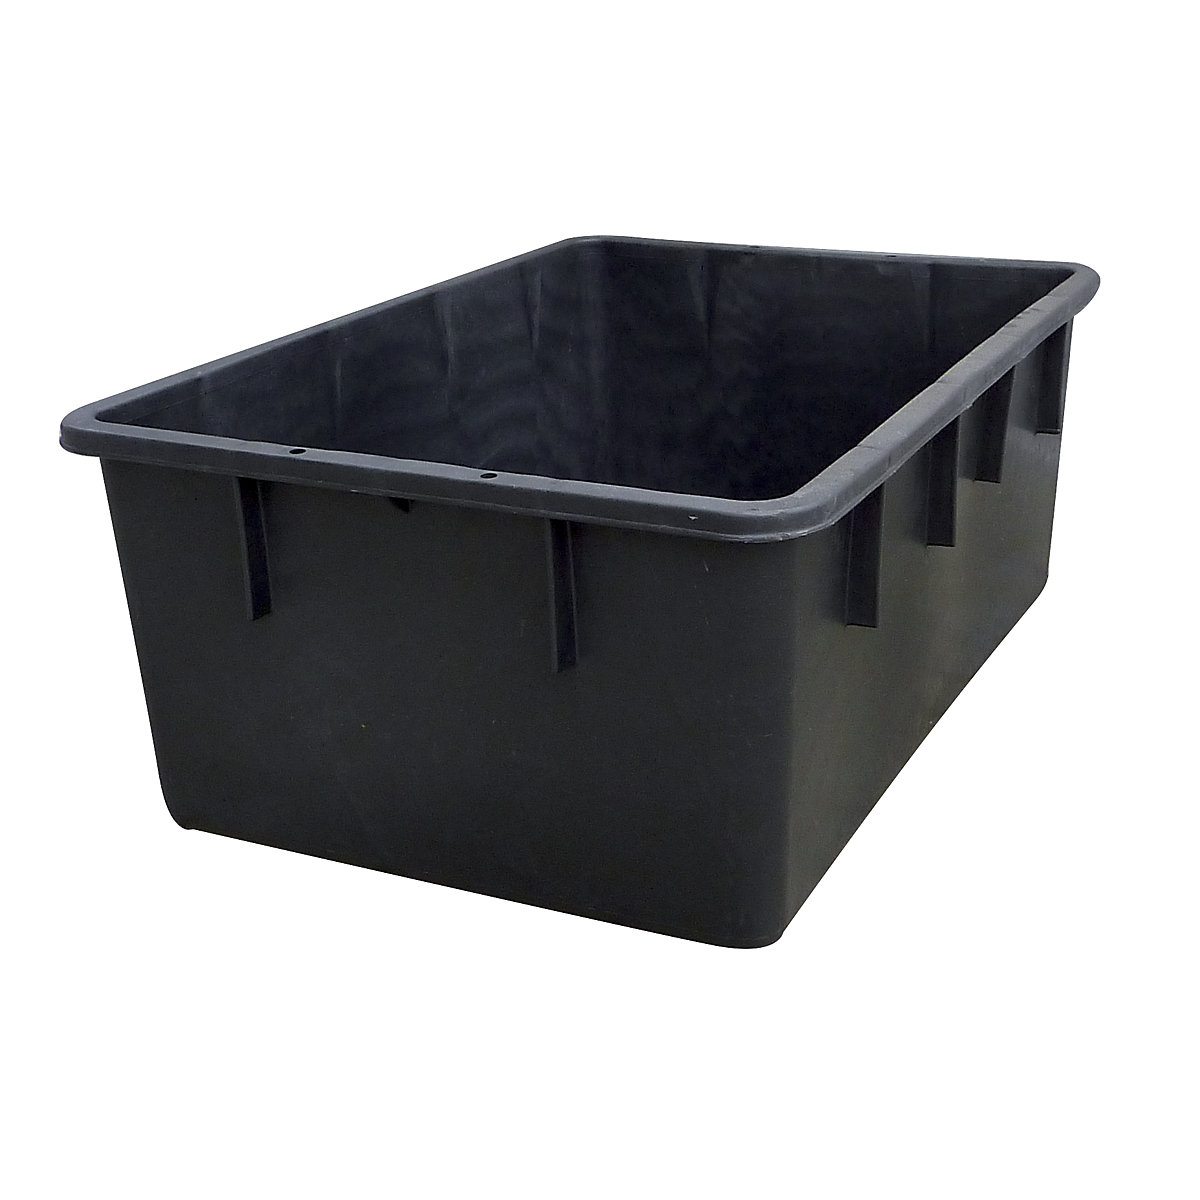 Stacking container made of polyethylene, conical design, capacity 160 l, black, 10 +-4